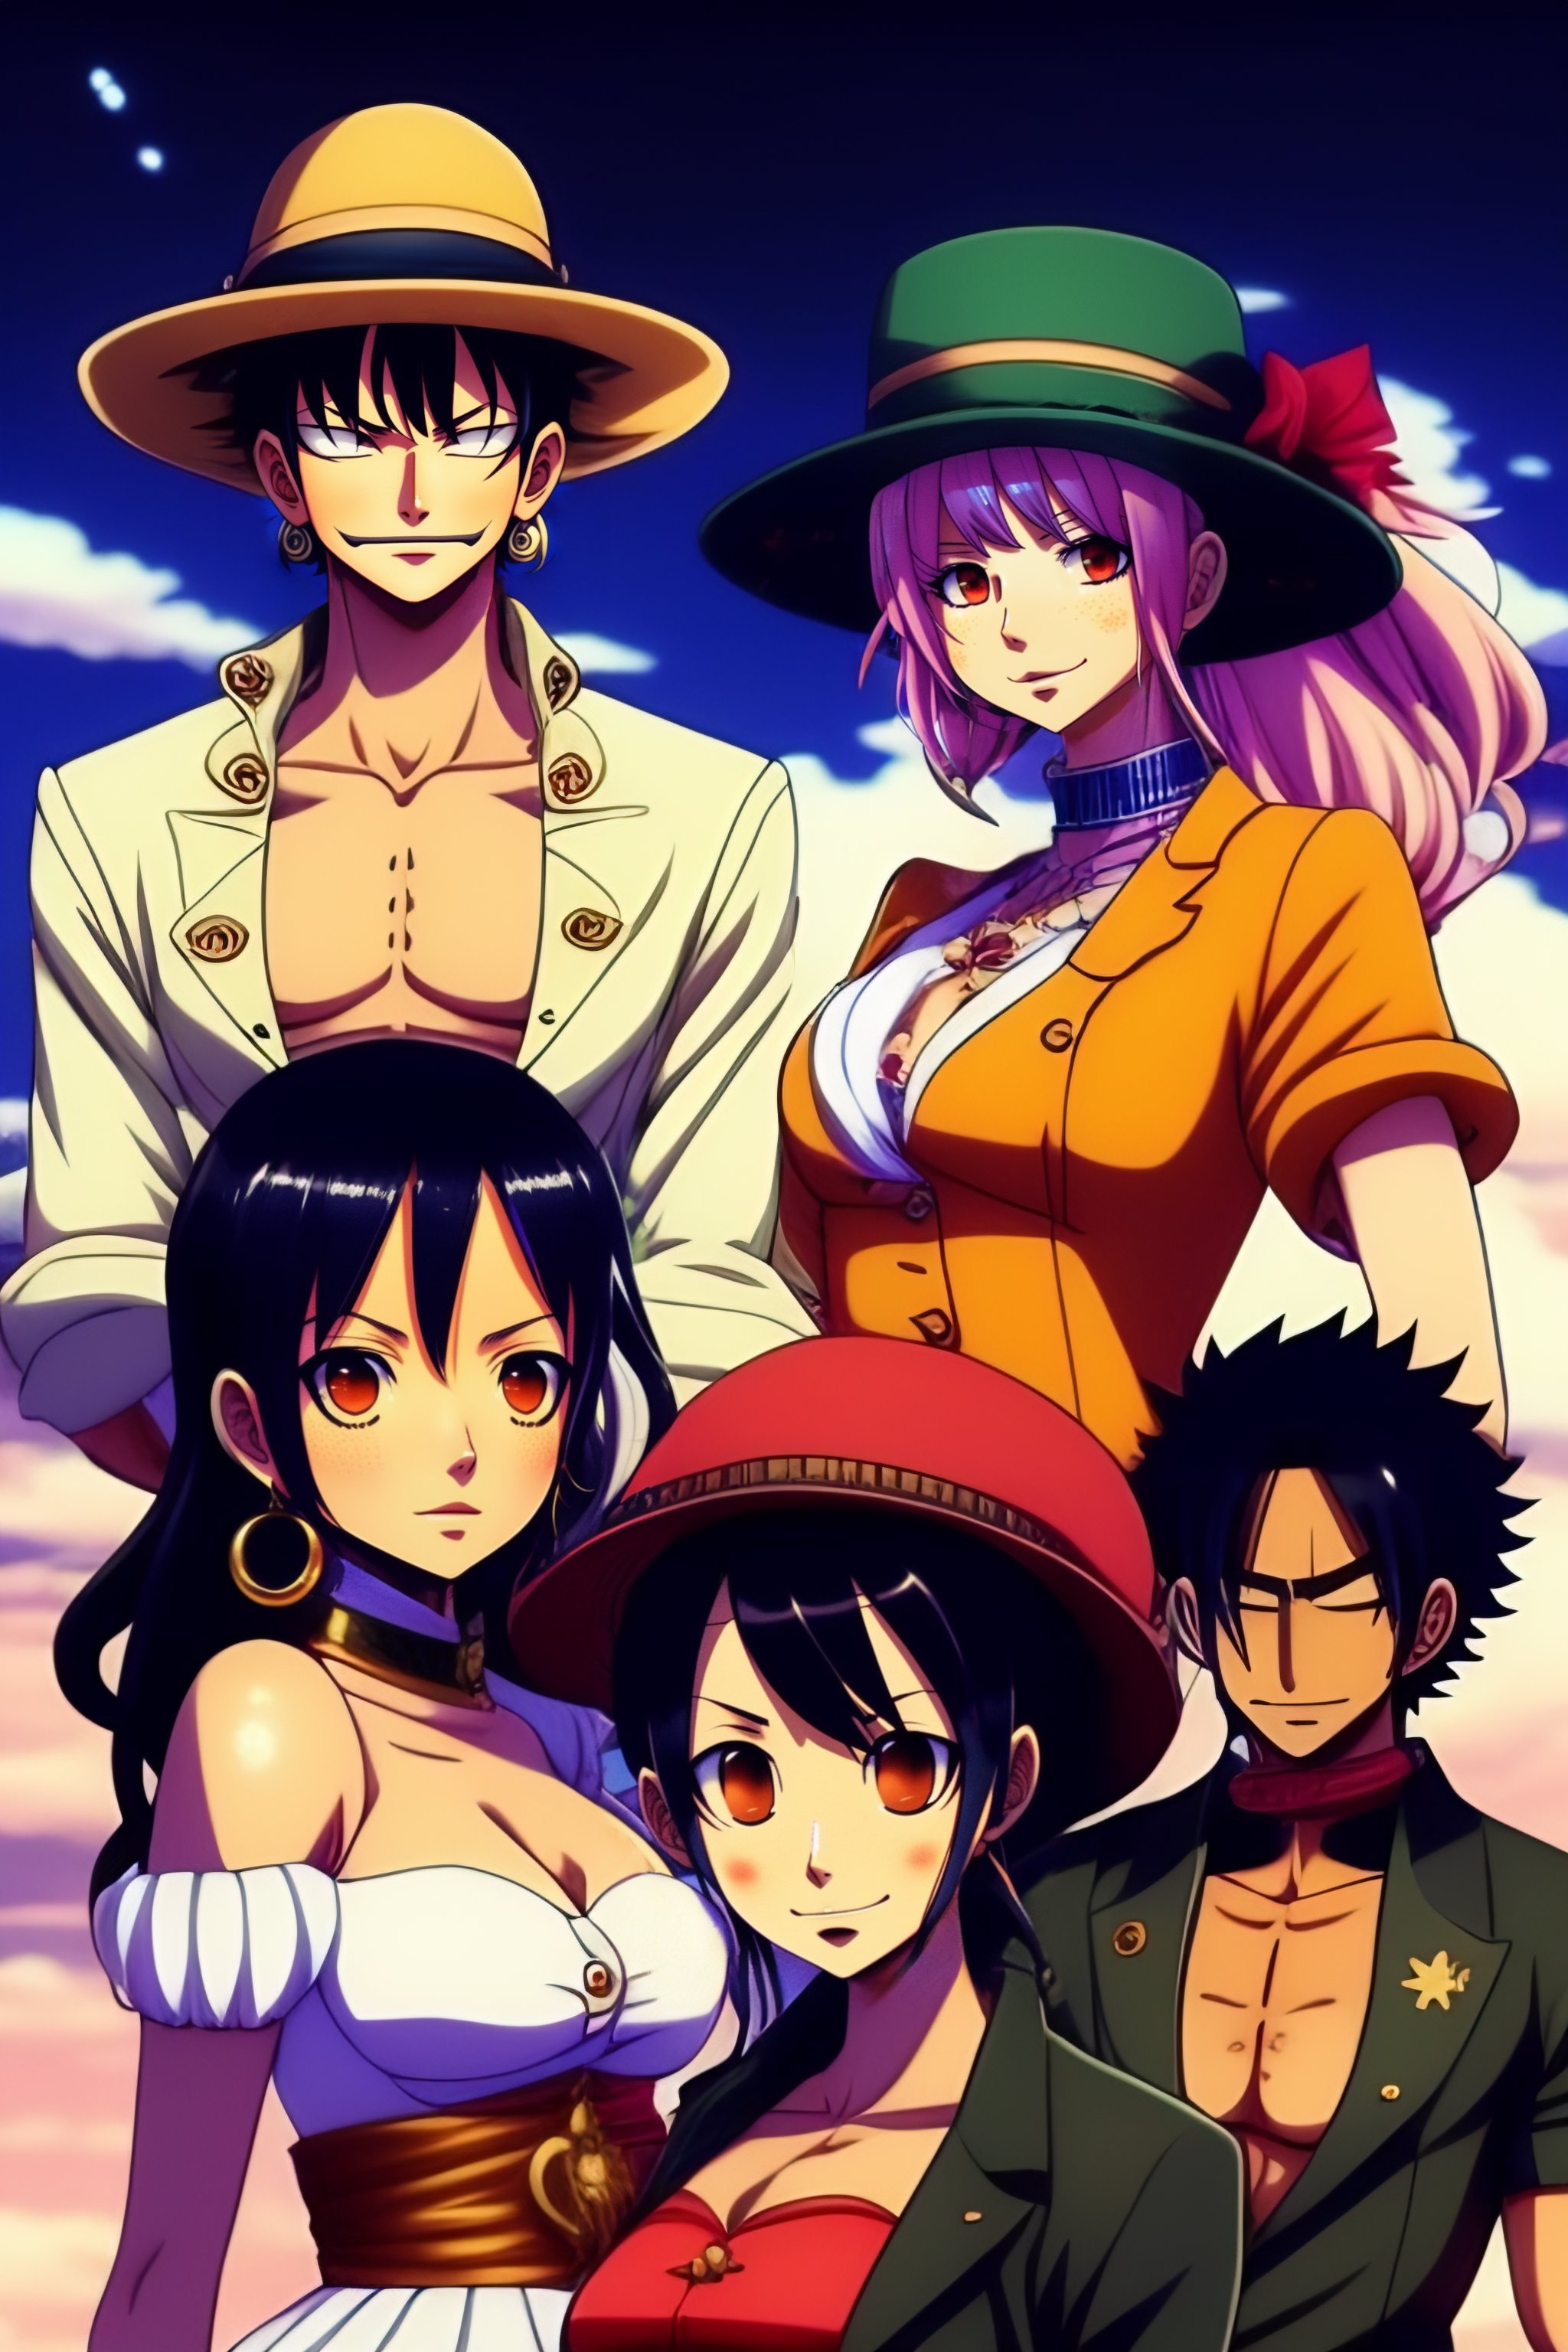 Lexica - Straw hat group from one piece anime in modern dress